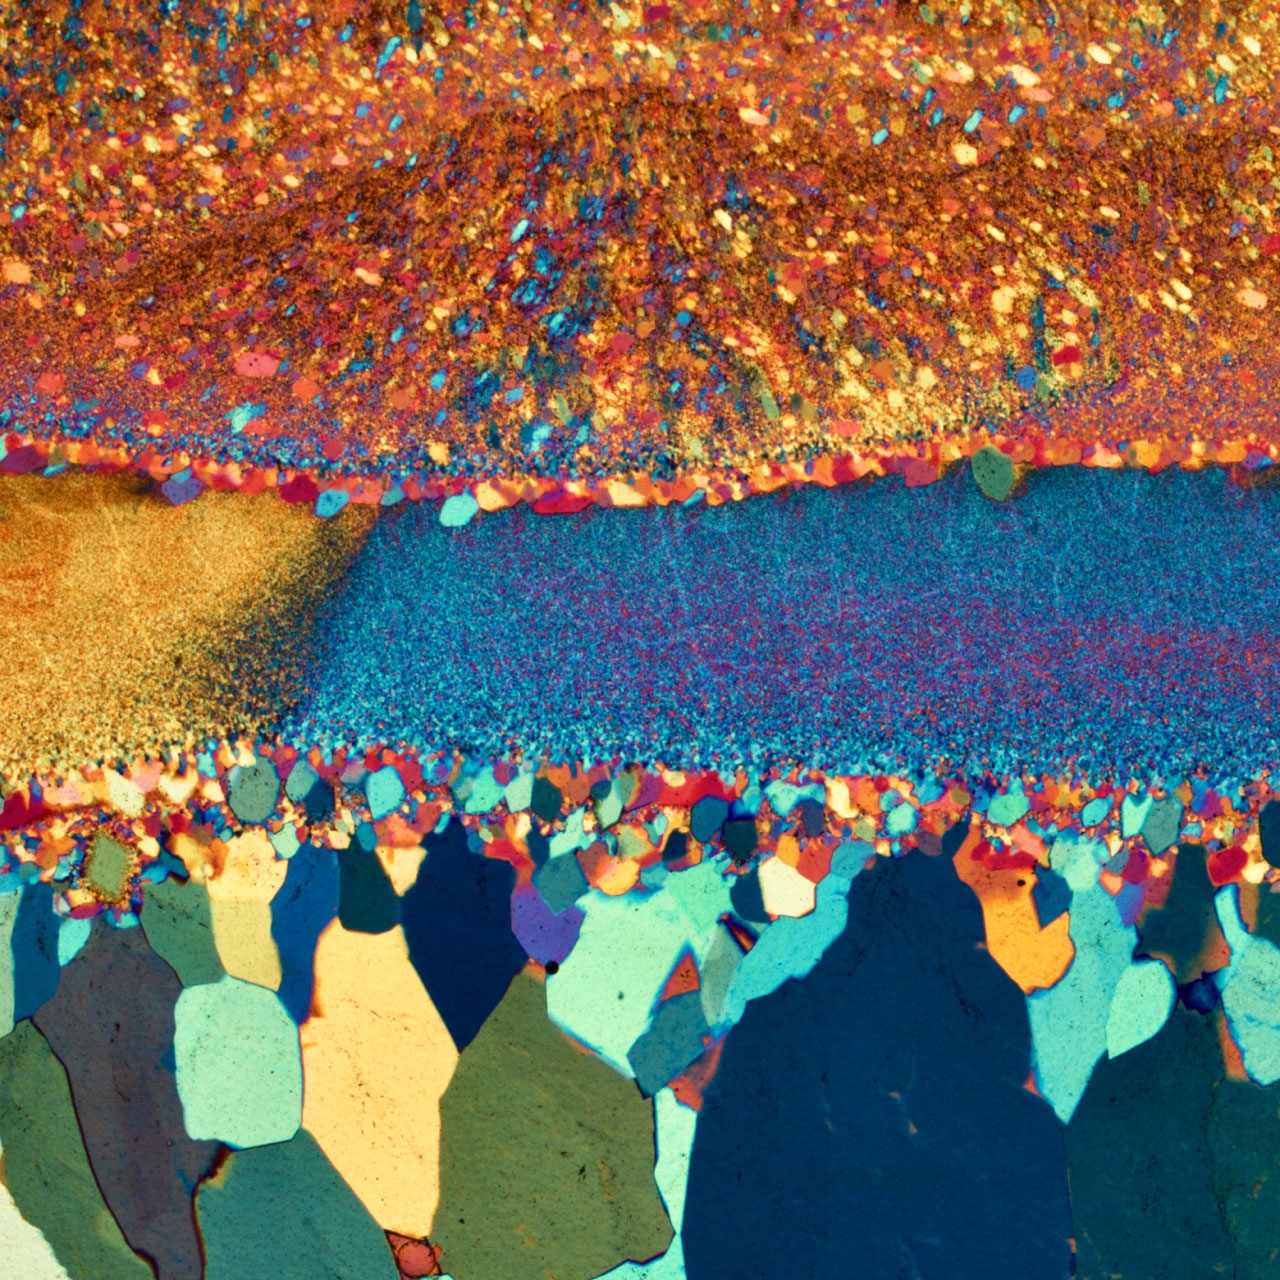 Third Prize Image: Thin section of an agate from Brazil